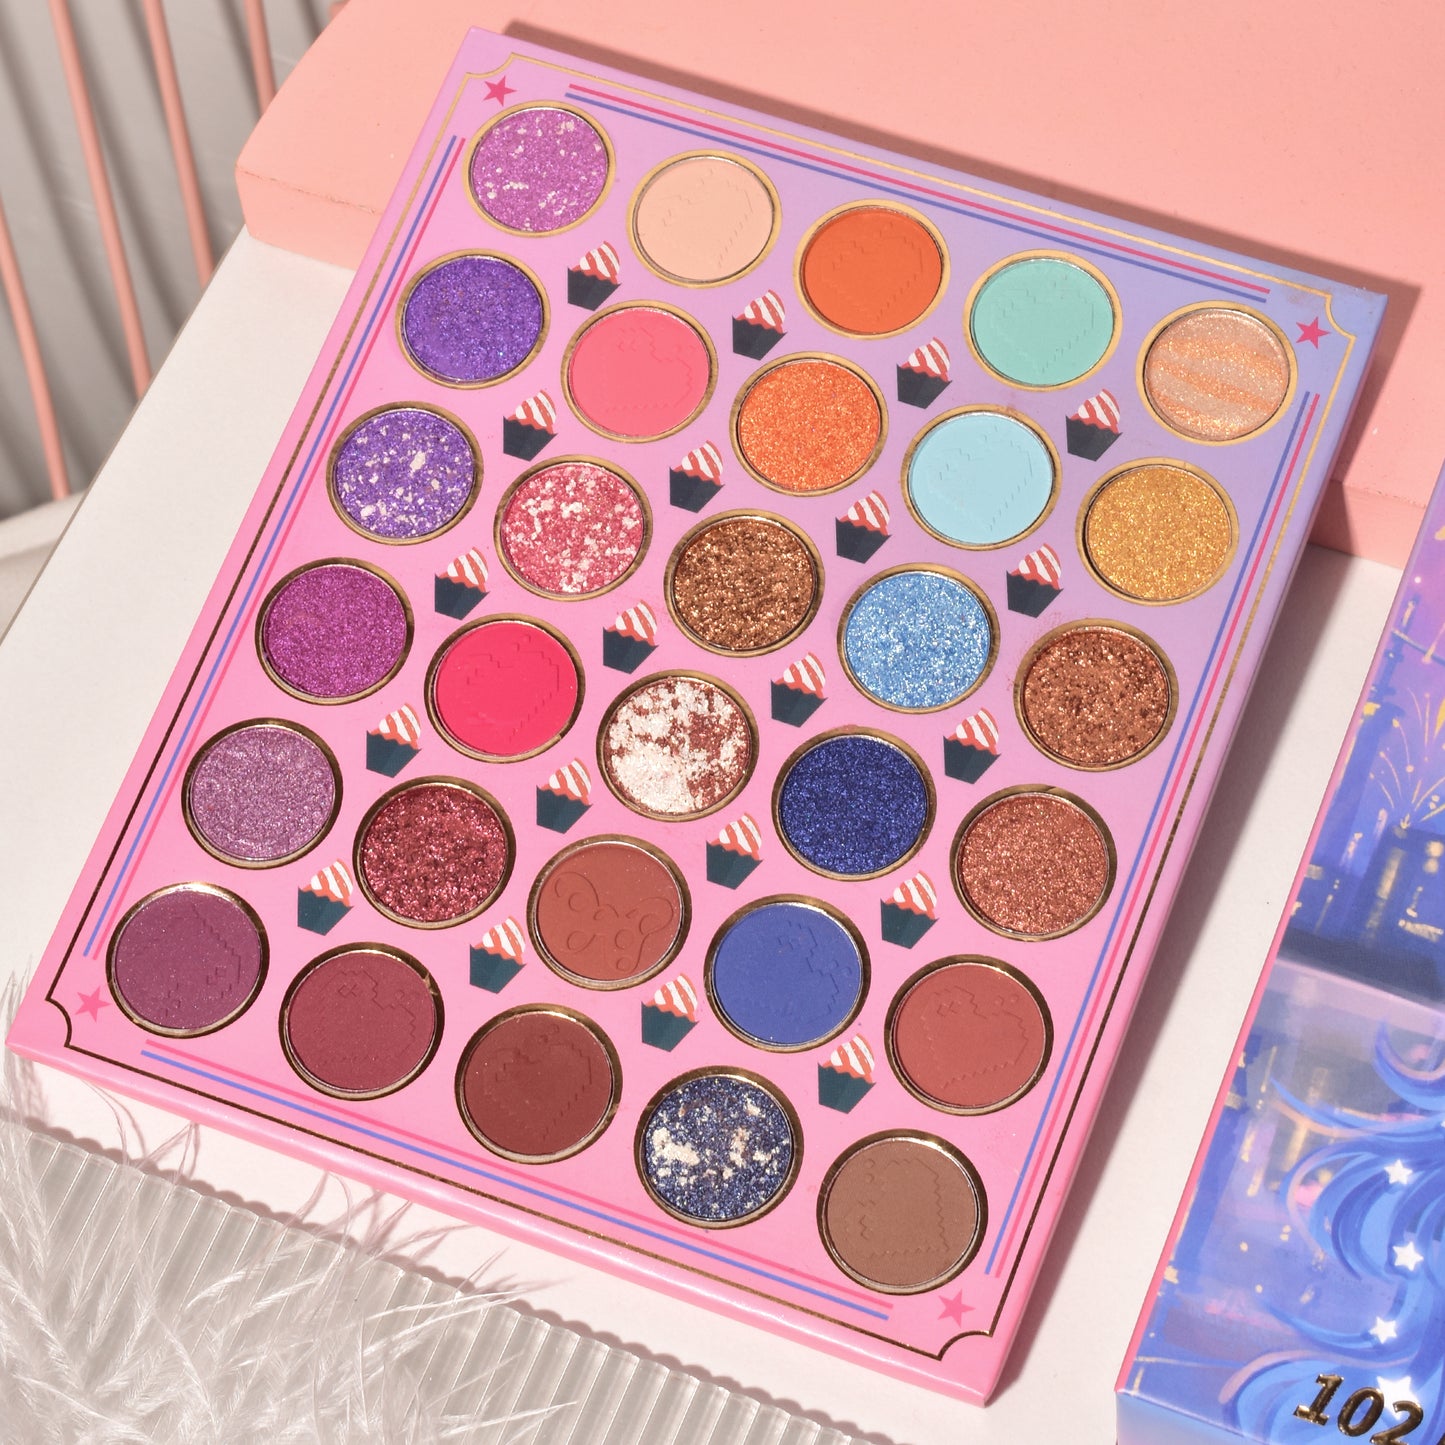 KEVIN & COCO - 102 Colors Freedom Girl Eyeshadow Palette Set